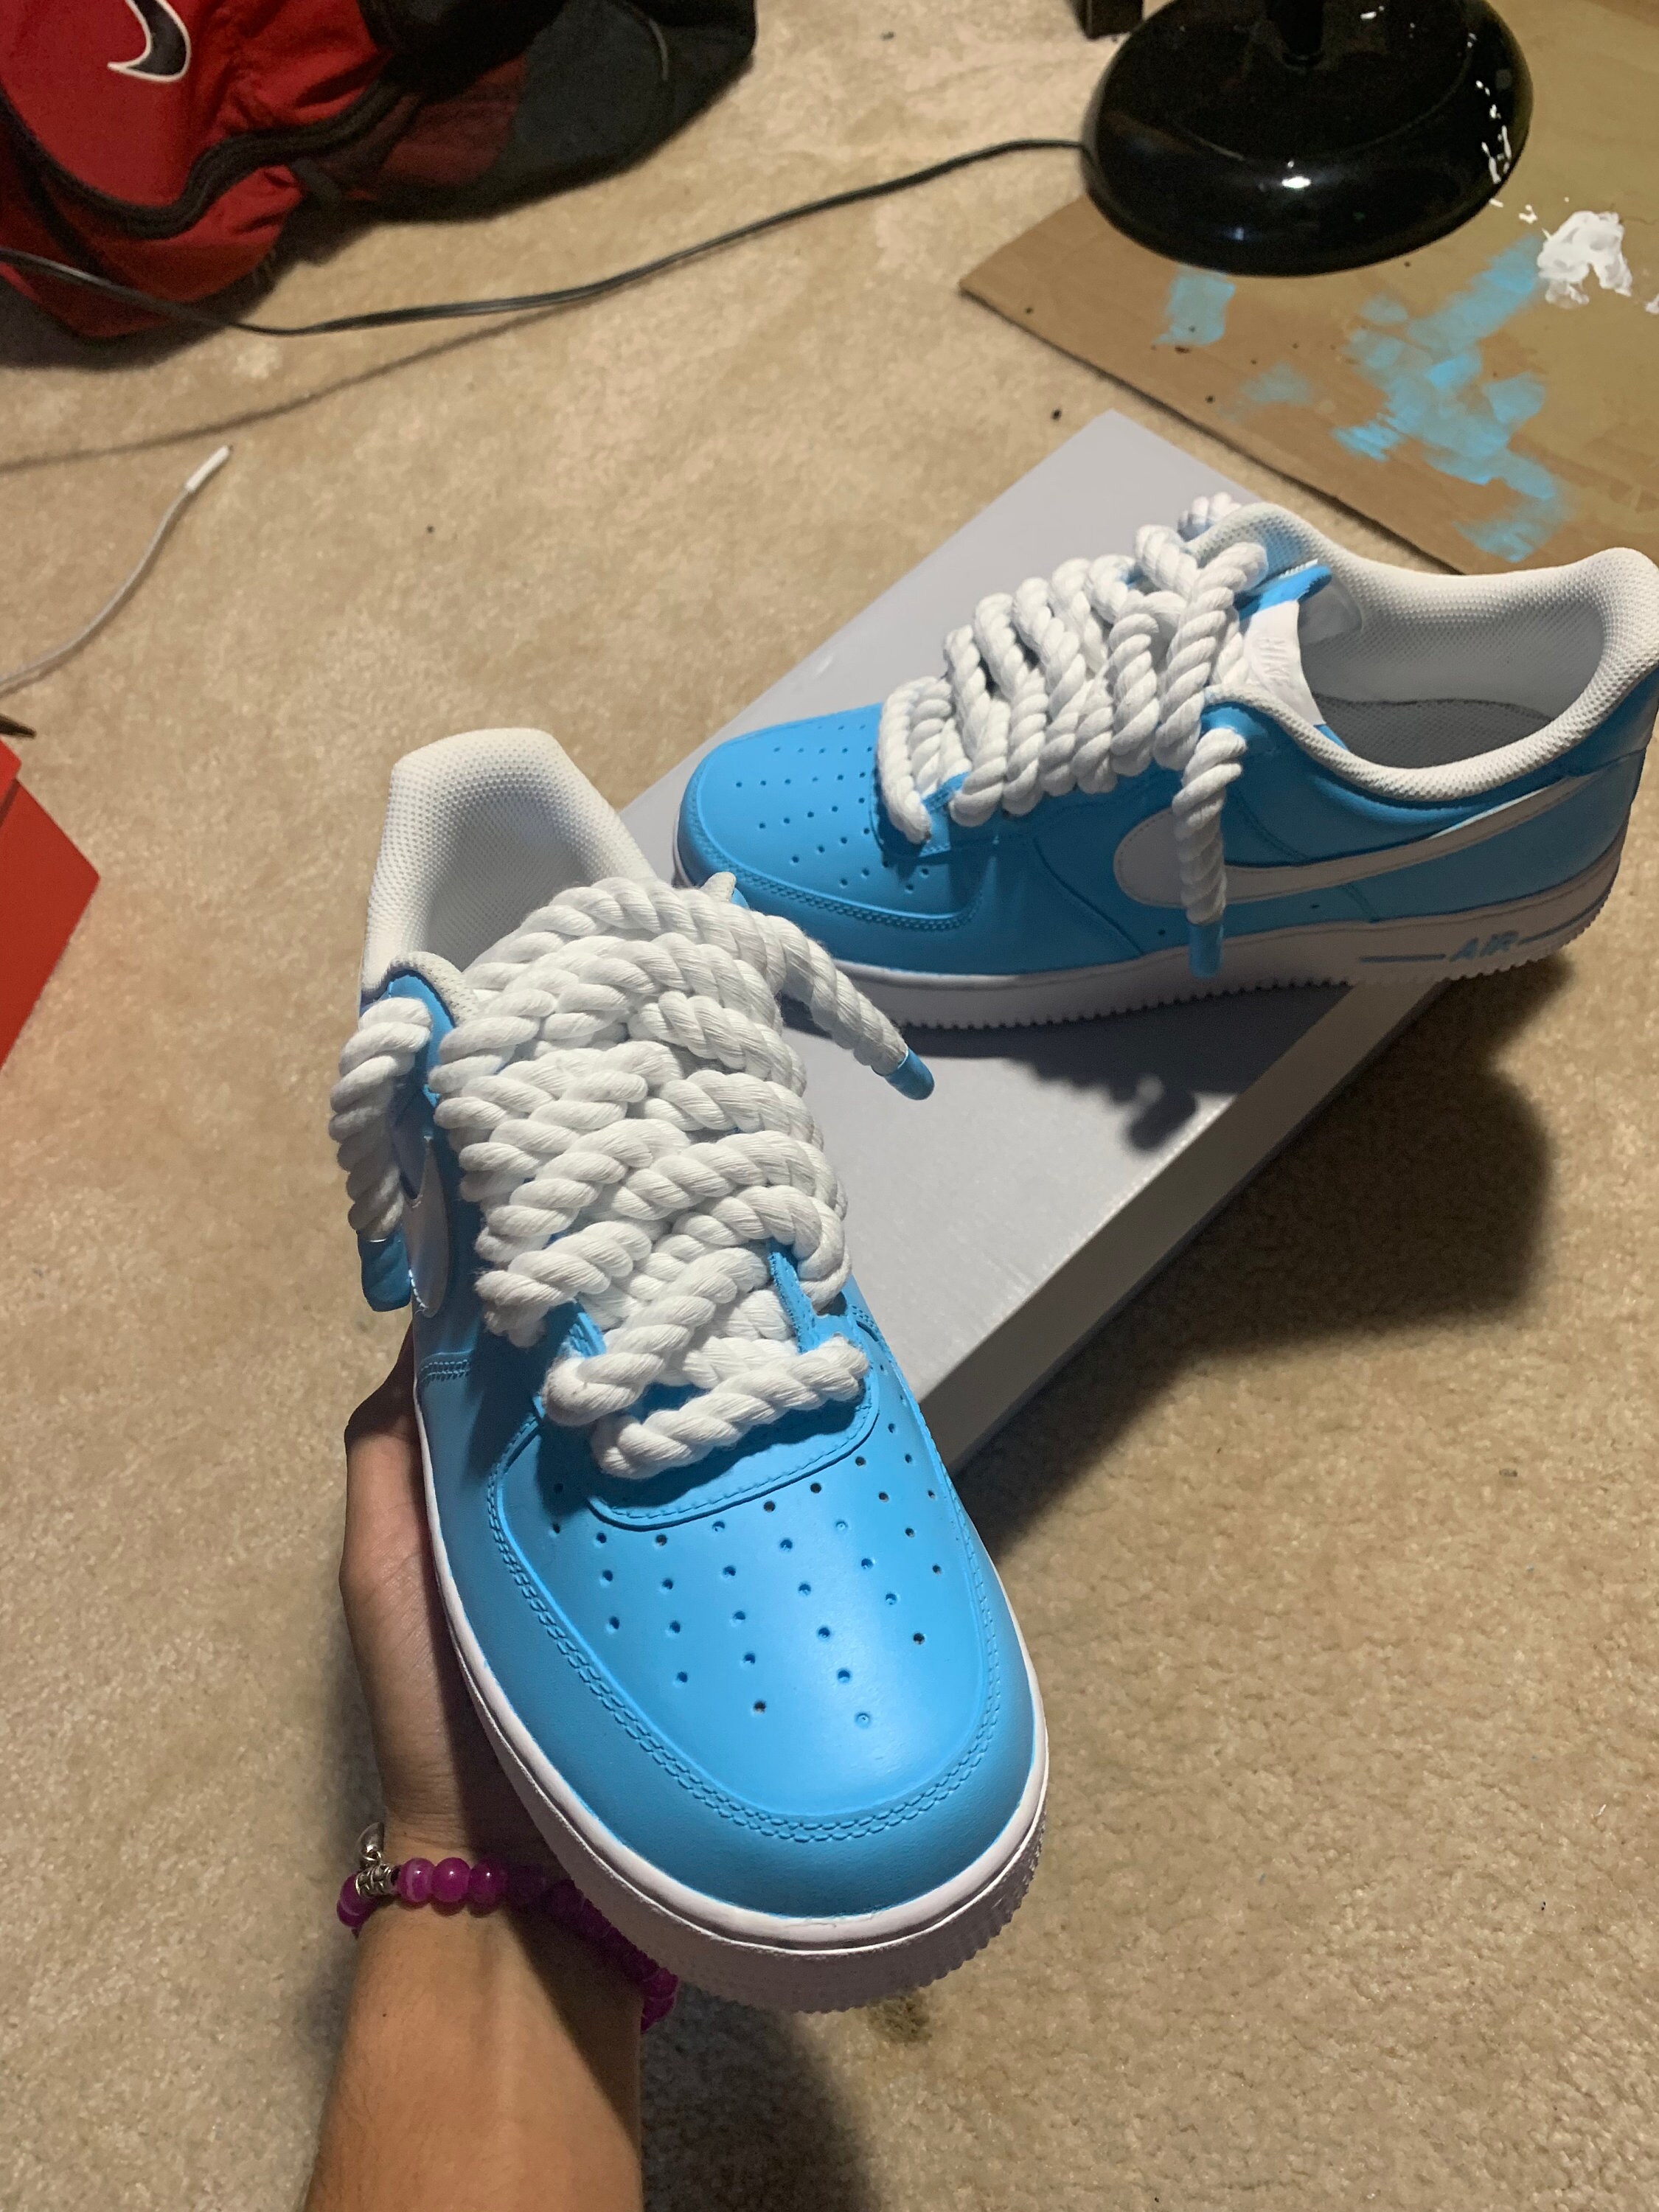 True Blue burning Air Force One with Rope Laces : r/Customsneakers